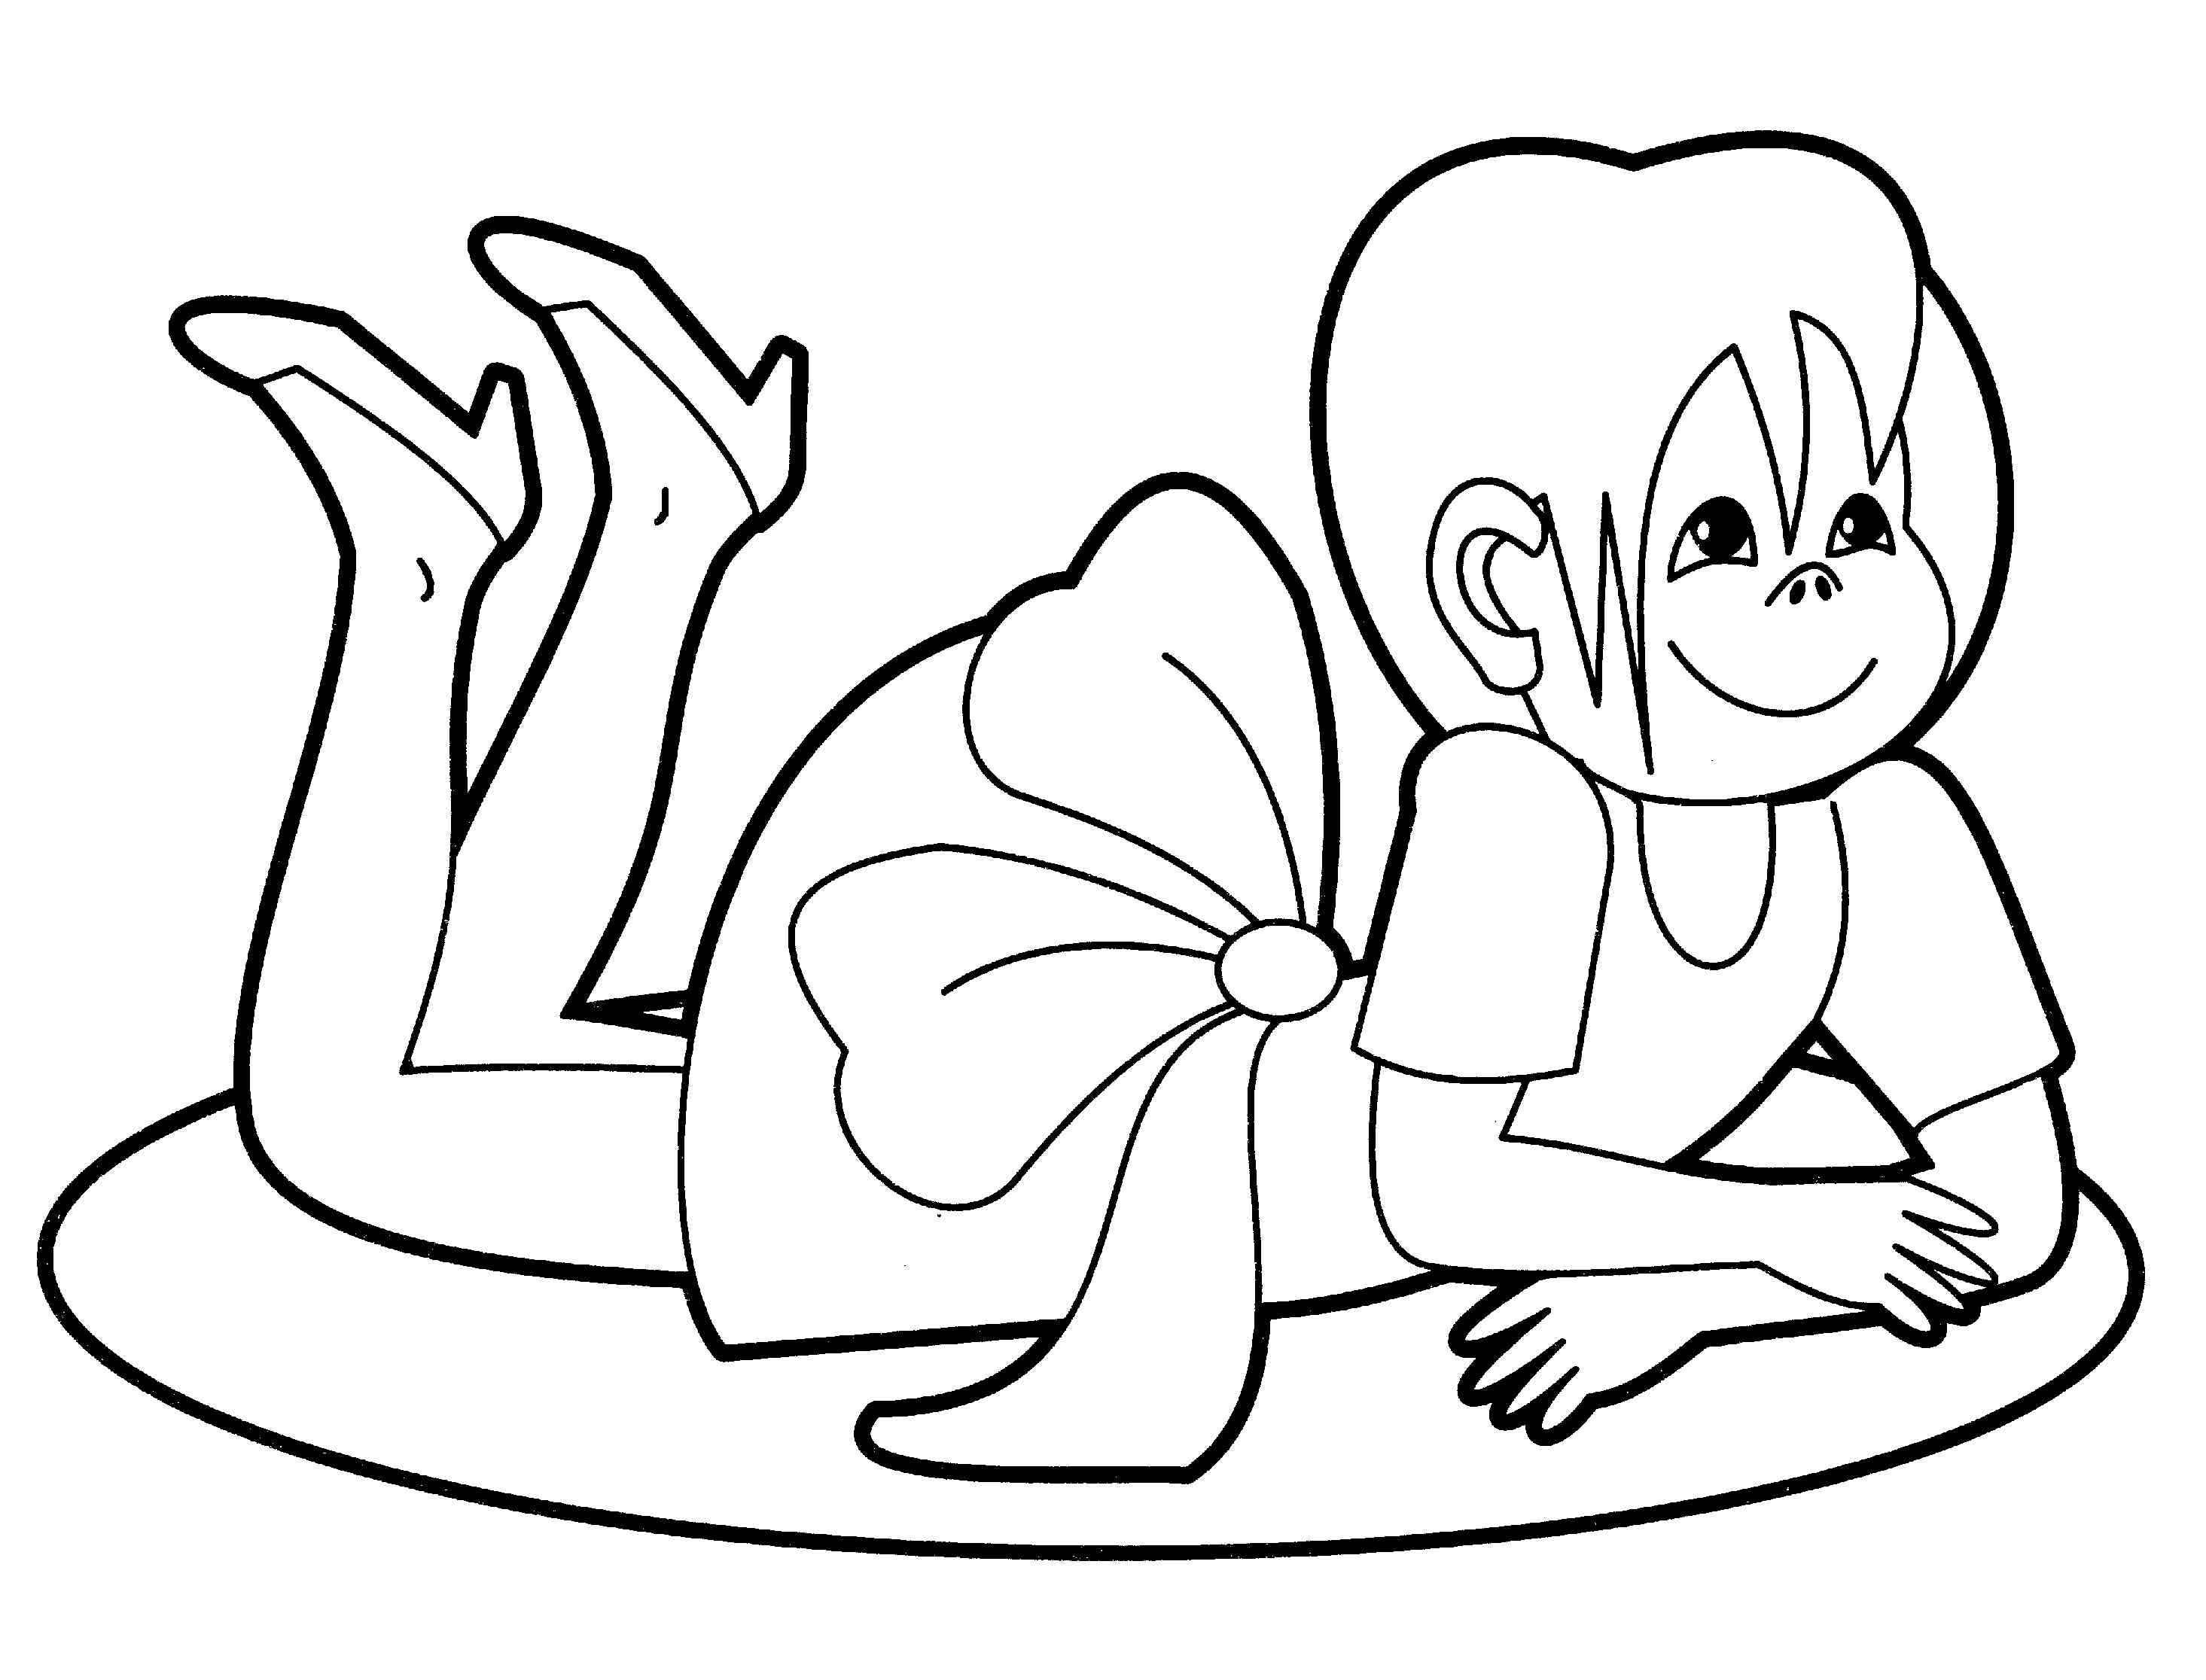 Little people coloring pages for babies 29 - Free games for ...